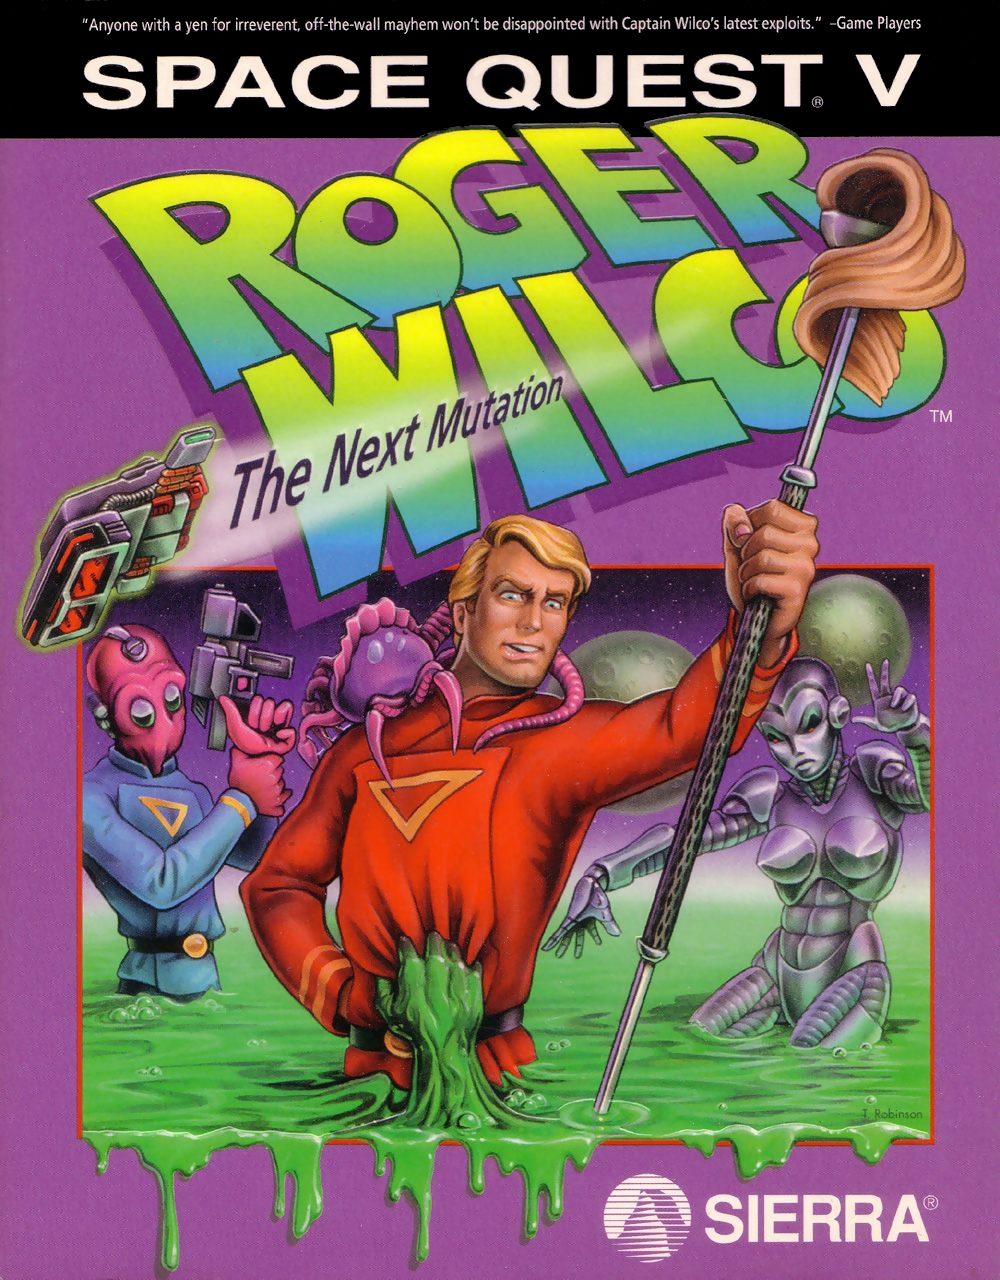 Space Quest V: Roger Wilco The Next Mutation